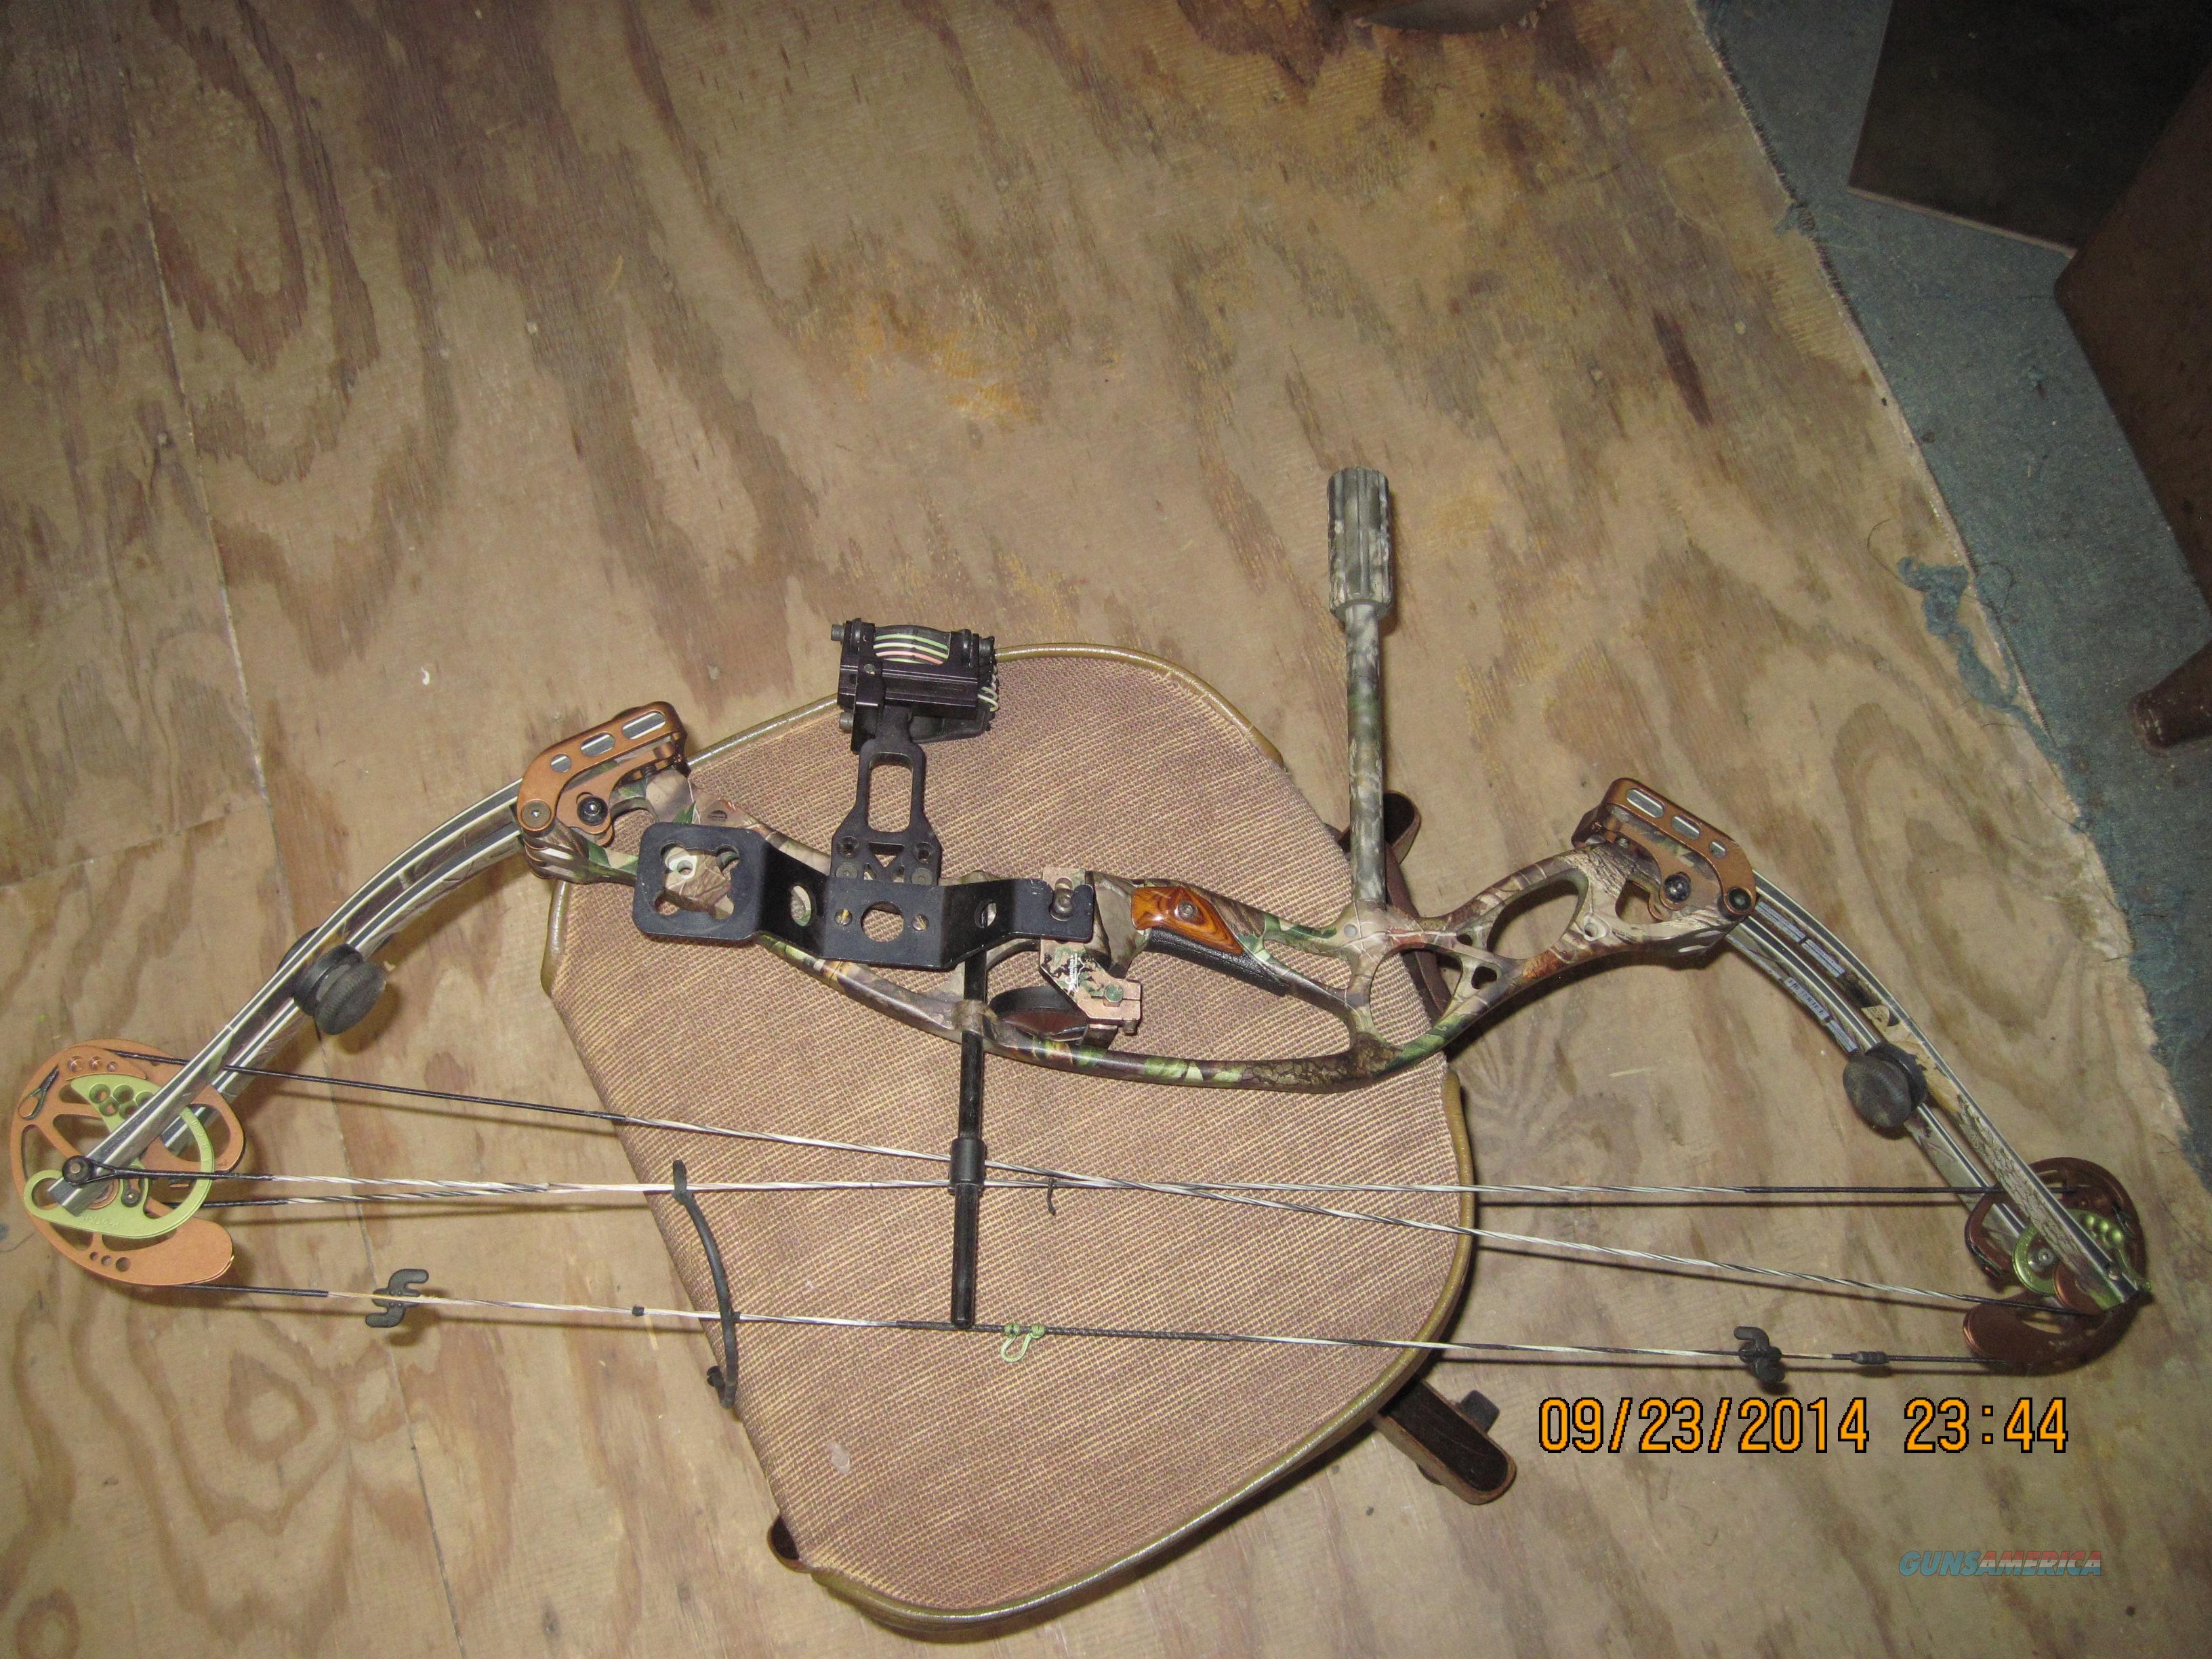 Hoyt X Tec 1000 Total Compound Bow Like New